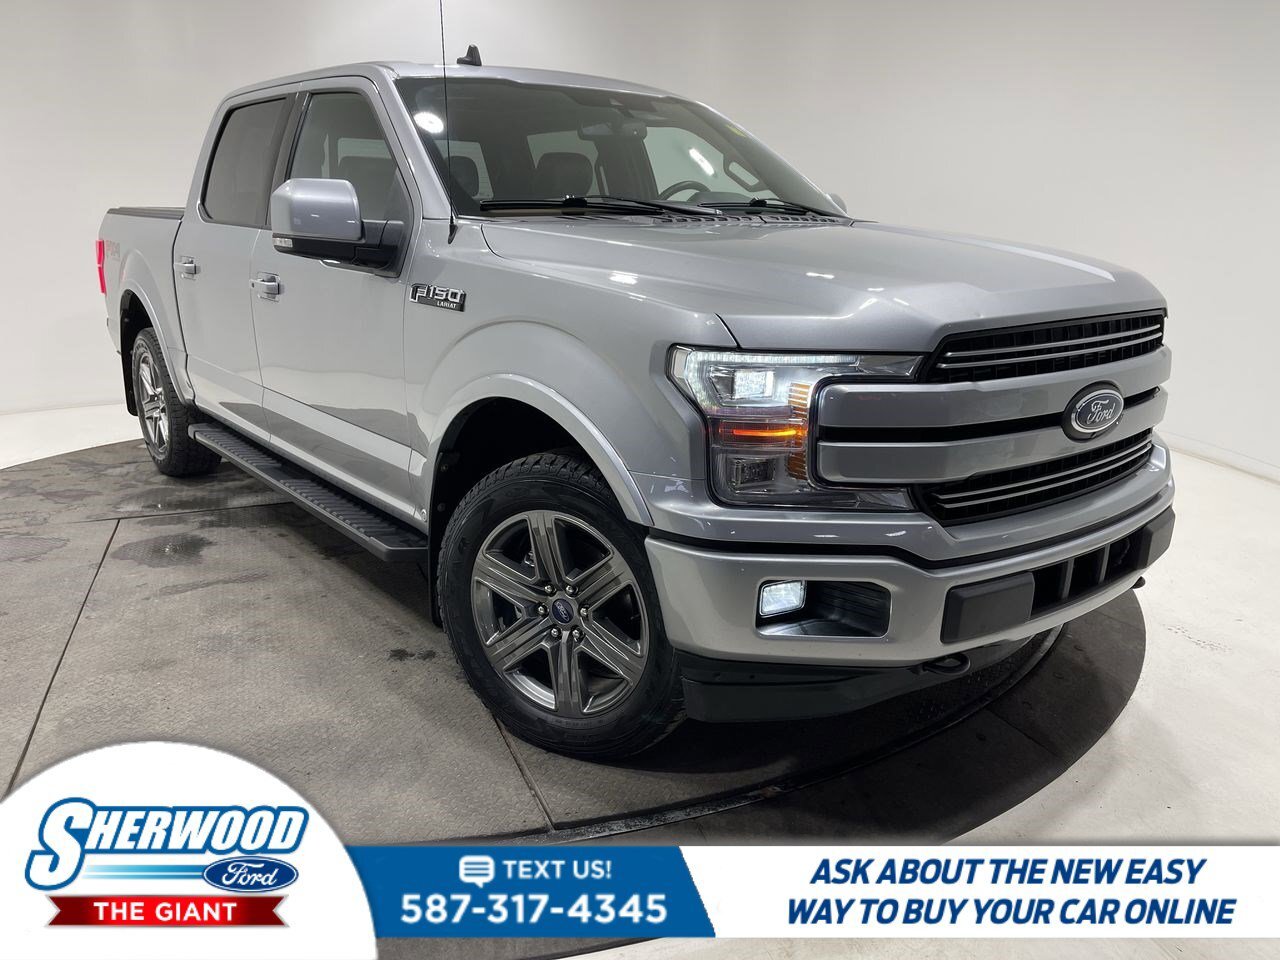 2020 Ford F-150 Lariat - $0 Down $197 Weekly - TONNEAU - TOW PKG